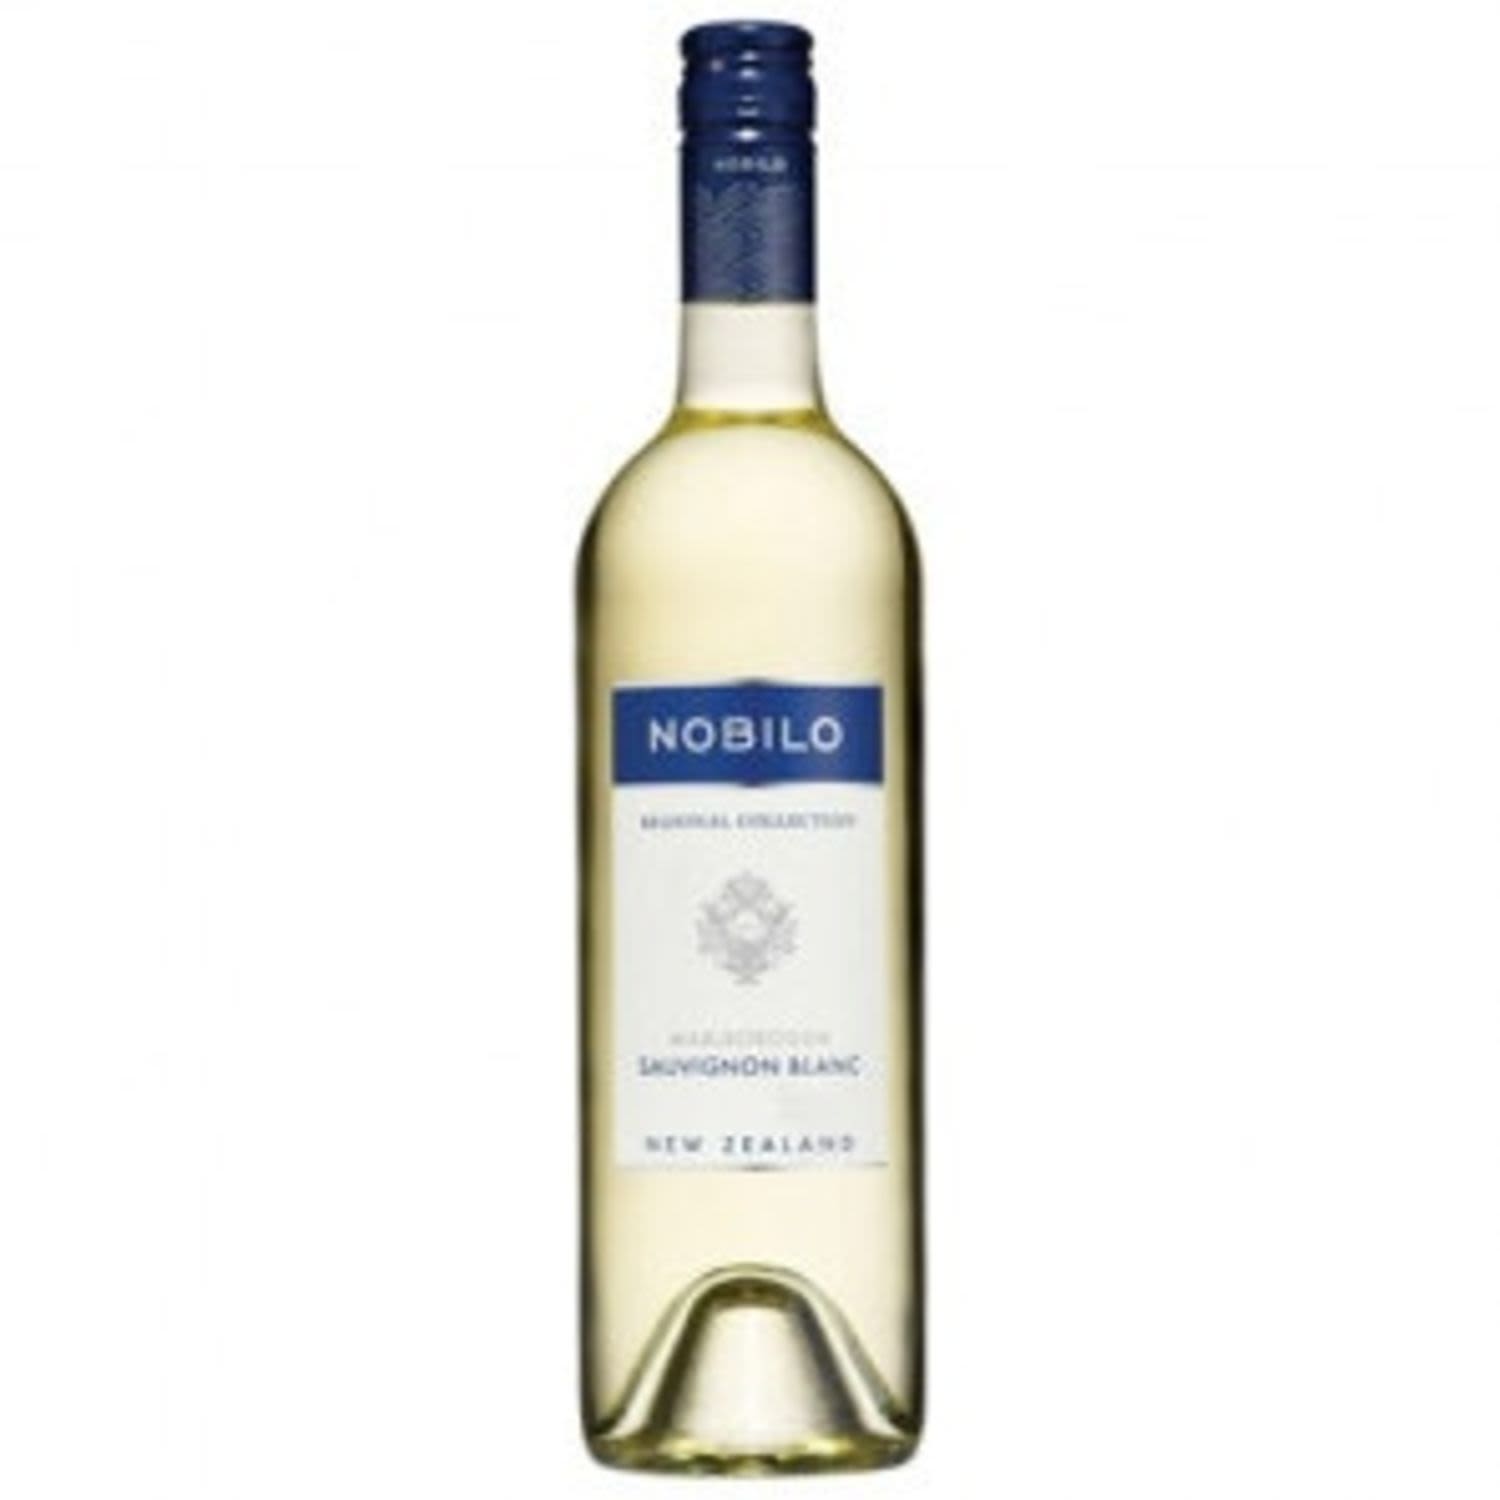 Fresh, crisp and clean with zesty flavors of ripe tropical fruits, especially passionfruit and pineapple with subtle hints of green herbs. The wine is intensely flavored with balanced mouthwatering acidity and a generous finish.<br /> <br />Alcohol Volume: 12.30%<br /><br />Pack Format: Bottle<br /><br />Standard Drinks: 7.3</br /><br />Pack Type: Bottle<br /><br />Country of Origin: New Zealand<br /><br />Region: Marlborough<br /><br />Vintage: '2018<br />